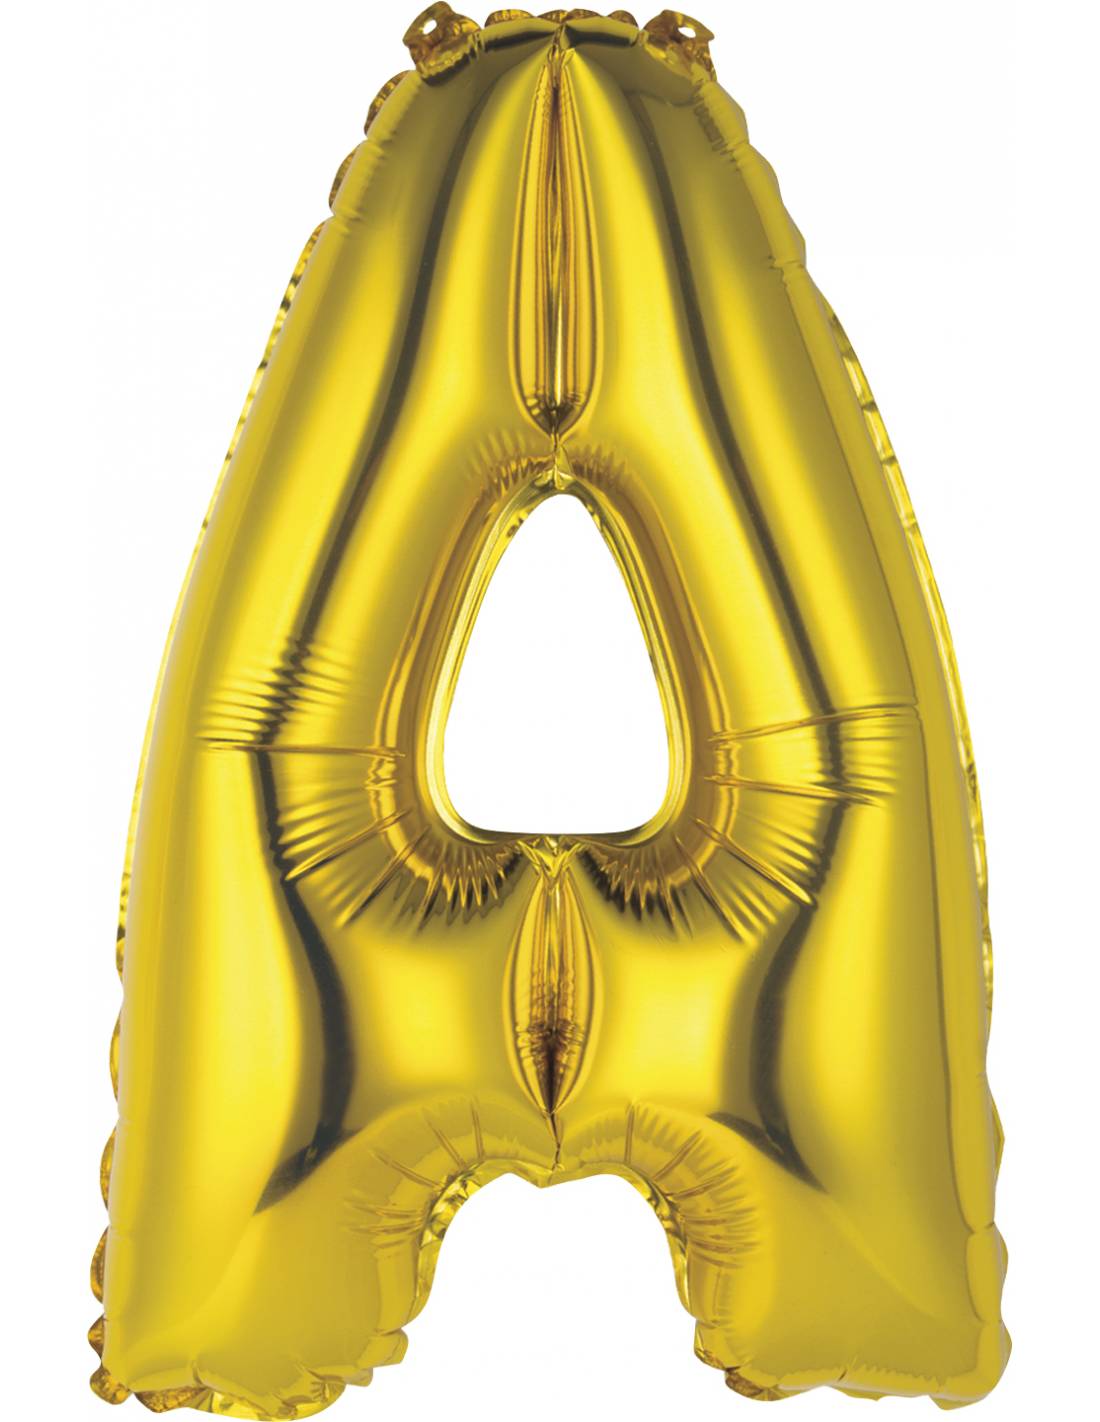 “A” Gold letter air filled balloon